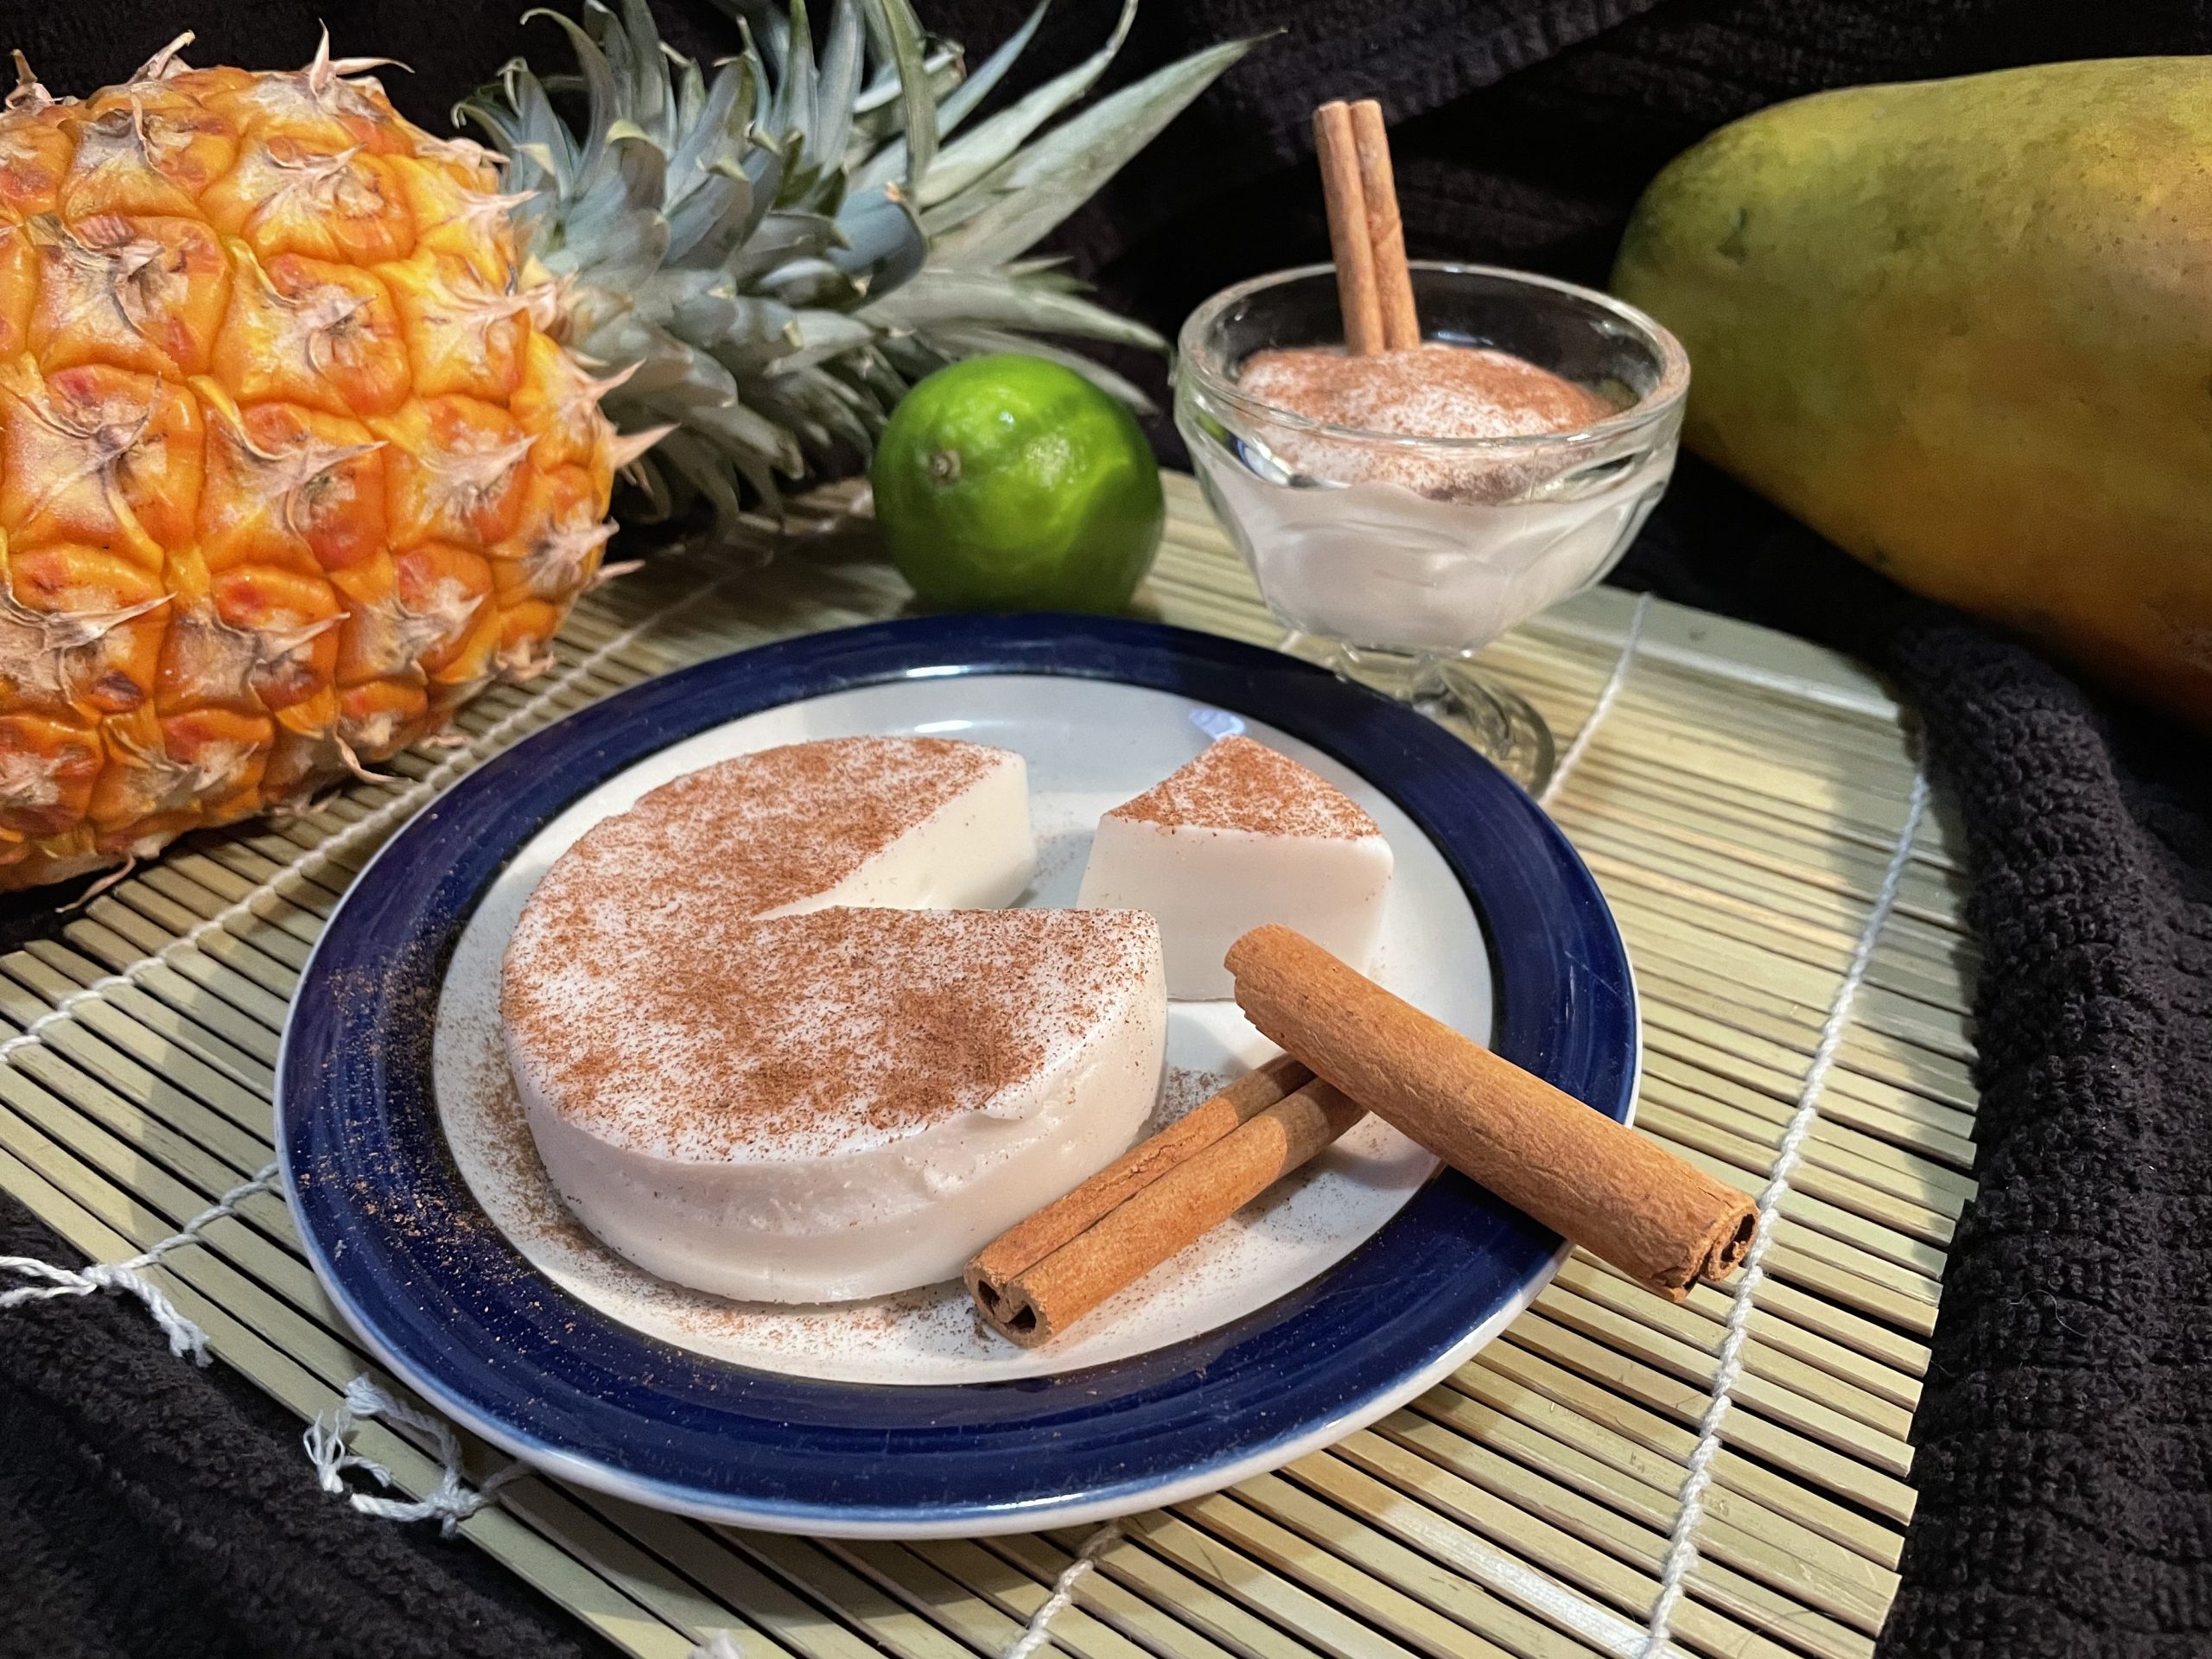 A blue rimmed plate featuring a round tembleque, which is a solid custard topped with cinnamon. Surrounded by cinnamon sticks, papaya, pineapple, lime, and a custard dish filled with more custard all on a bamboo mat and black kitchen towel.